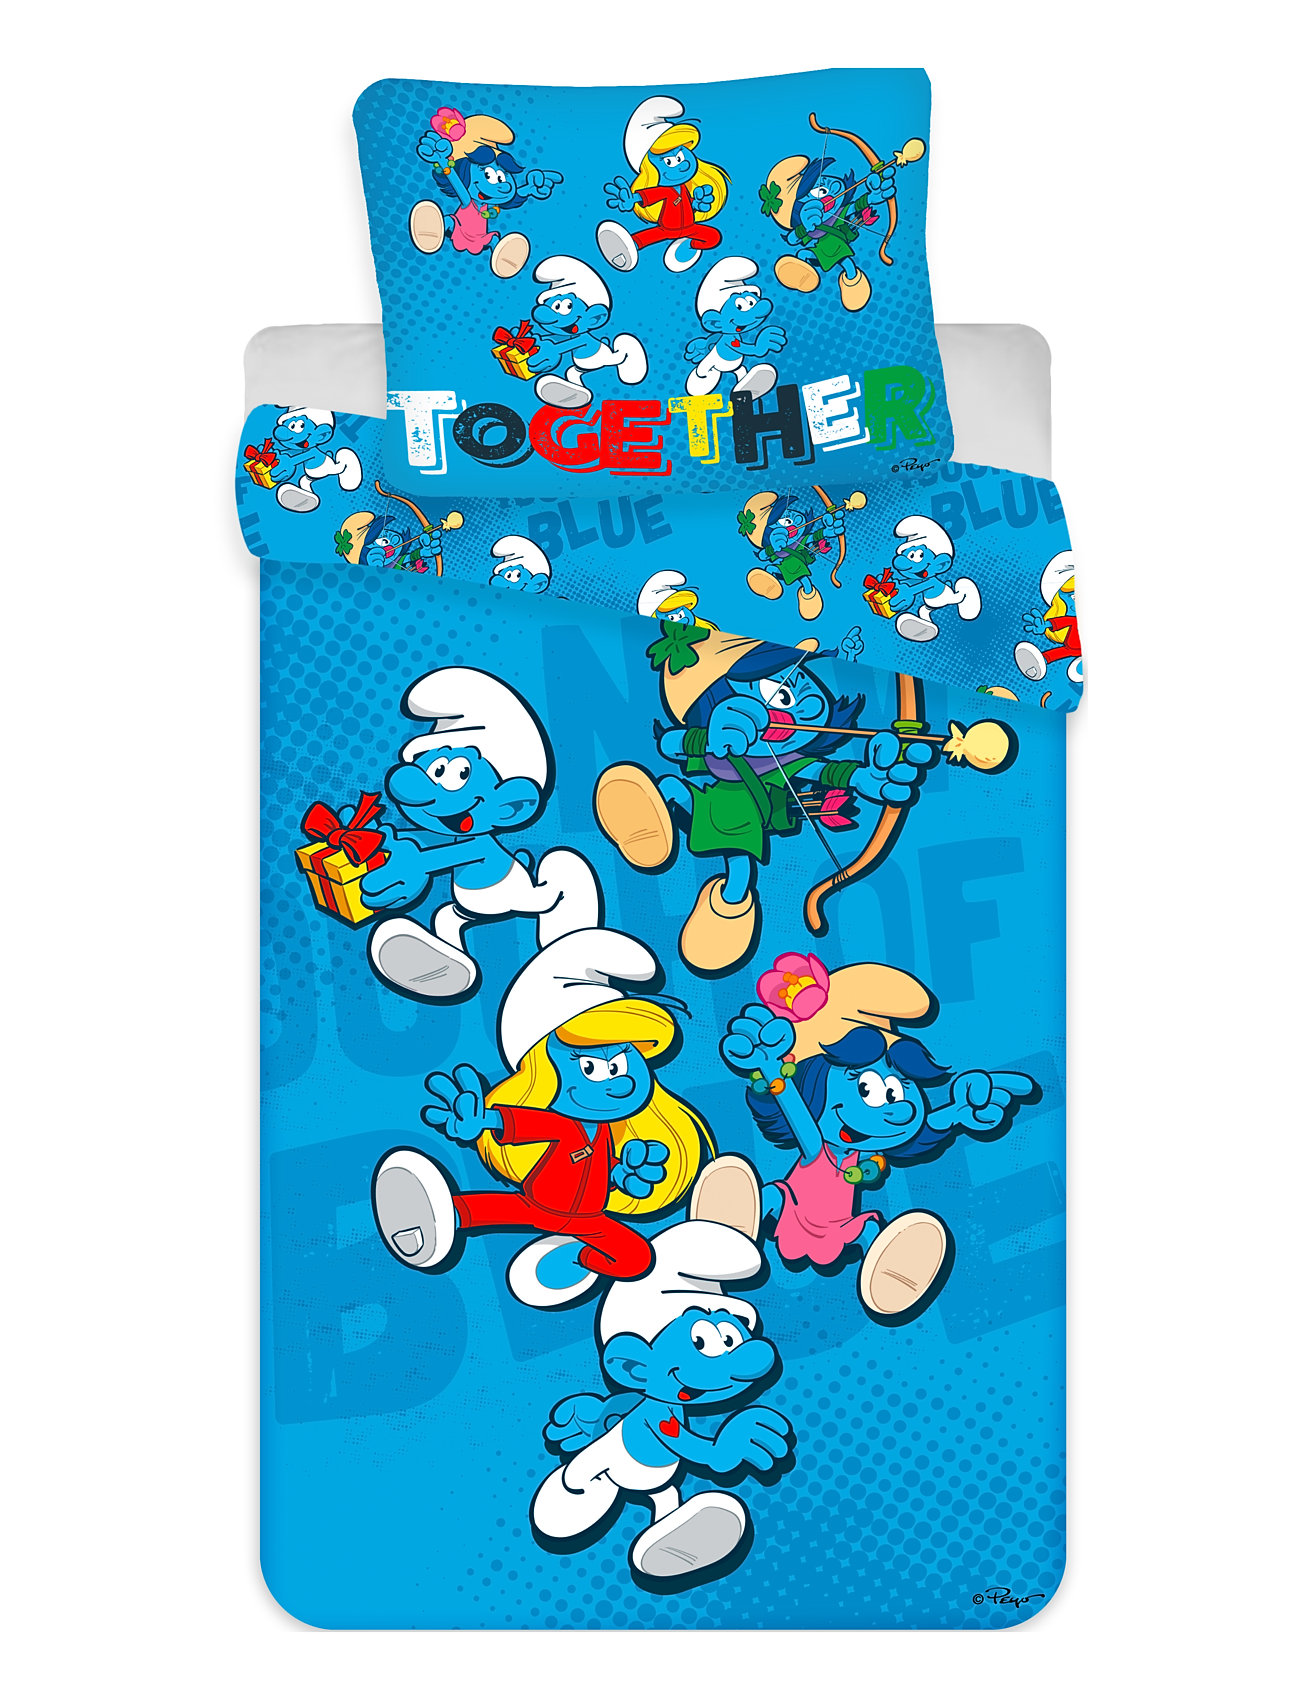 Bed Linen Junior The Smurfs Ts 1002 Home Sleep Time Bed Sets Multi/patterned BrandMac